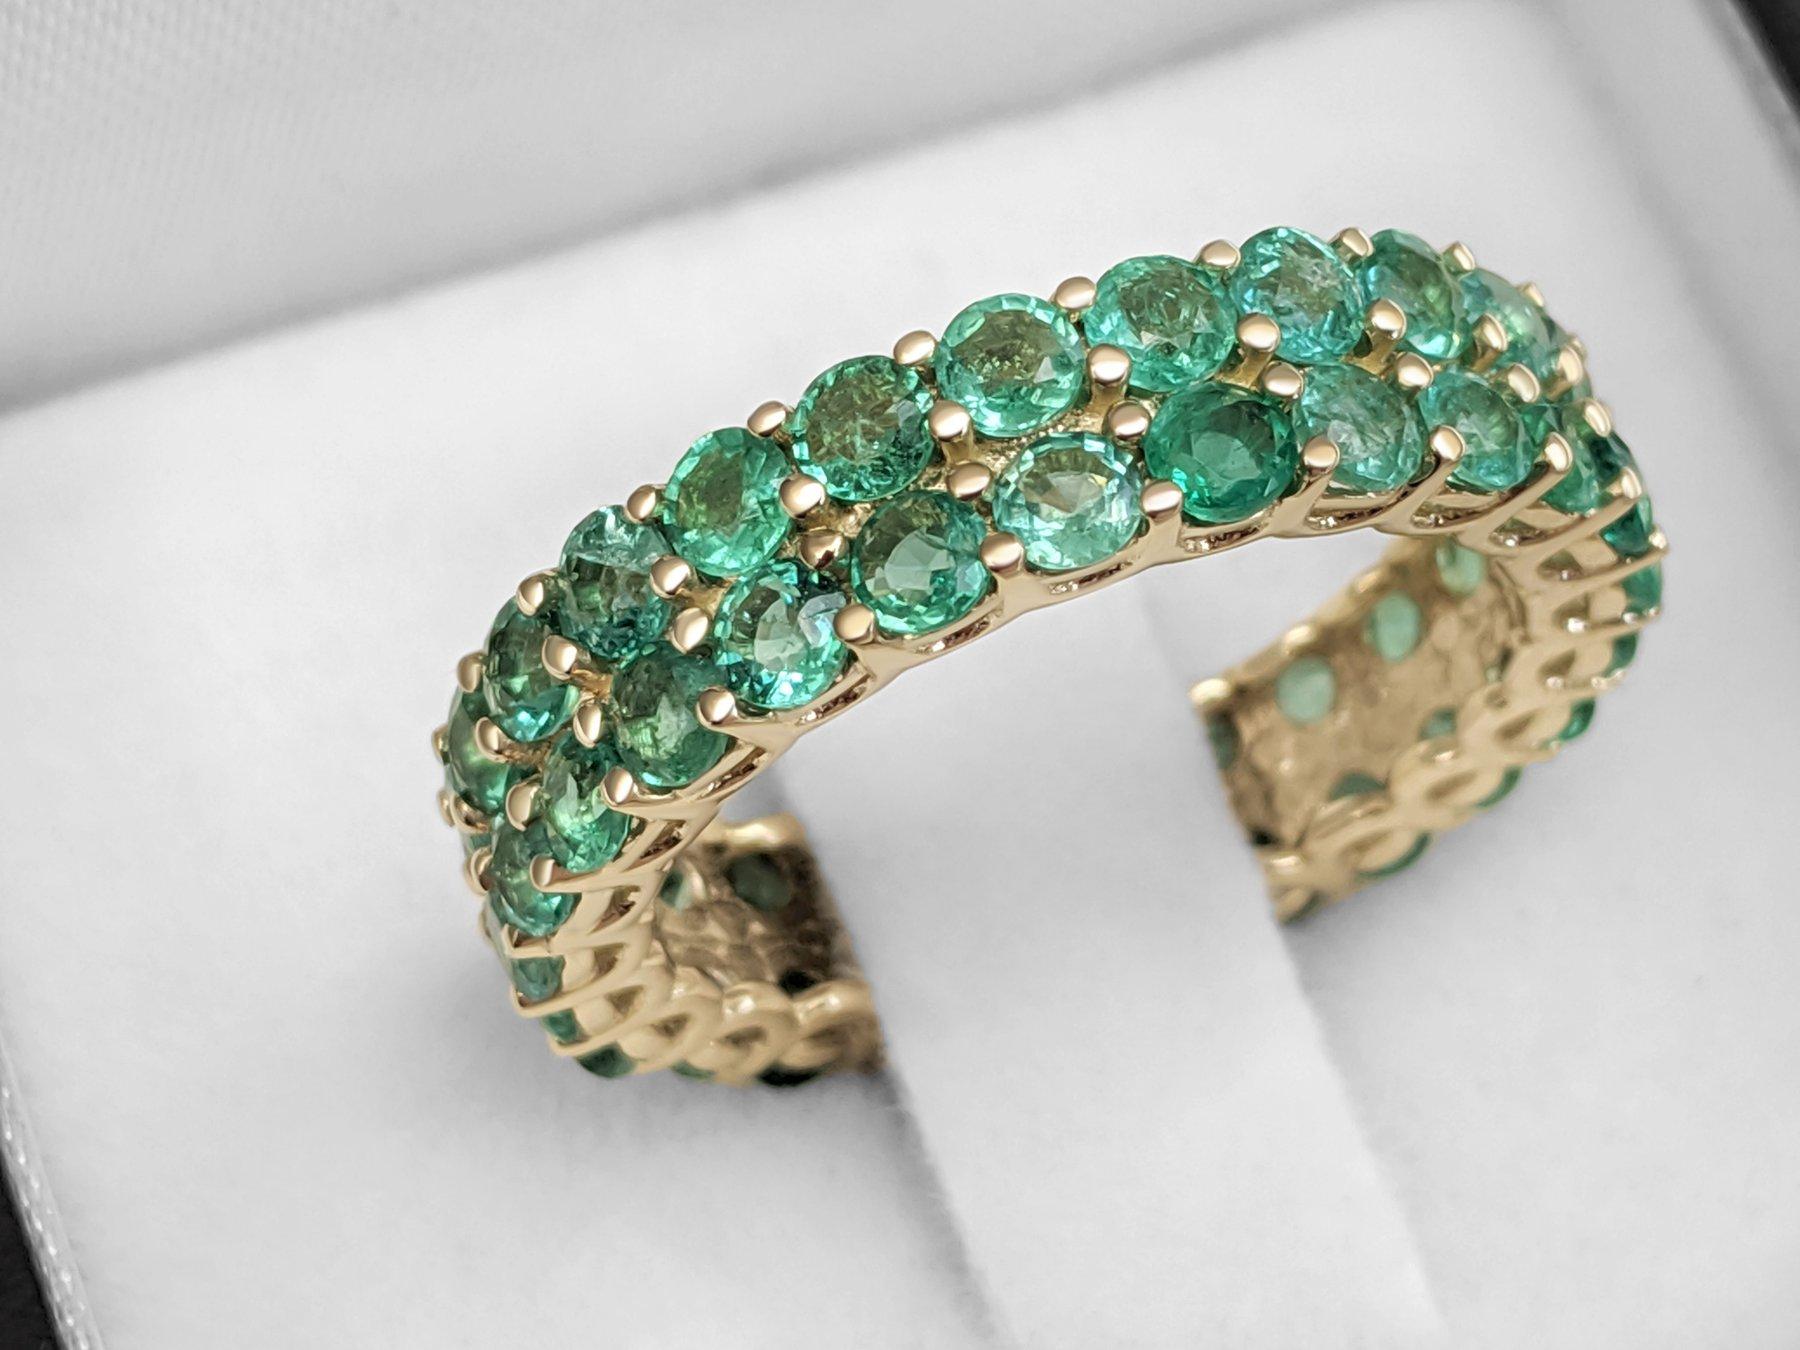 This ring is definitely a show stopper and will draw attention wherever you go! A great gift for yourself or your loved one - a heirloom piece to treasure forever!

Ring Size: 55 EU

Center Natural Emeralds:
Weight: 3.50 ct, 50 stones
Color: